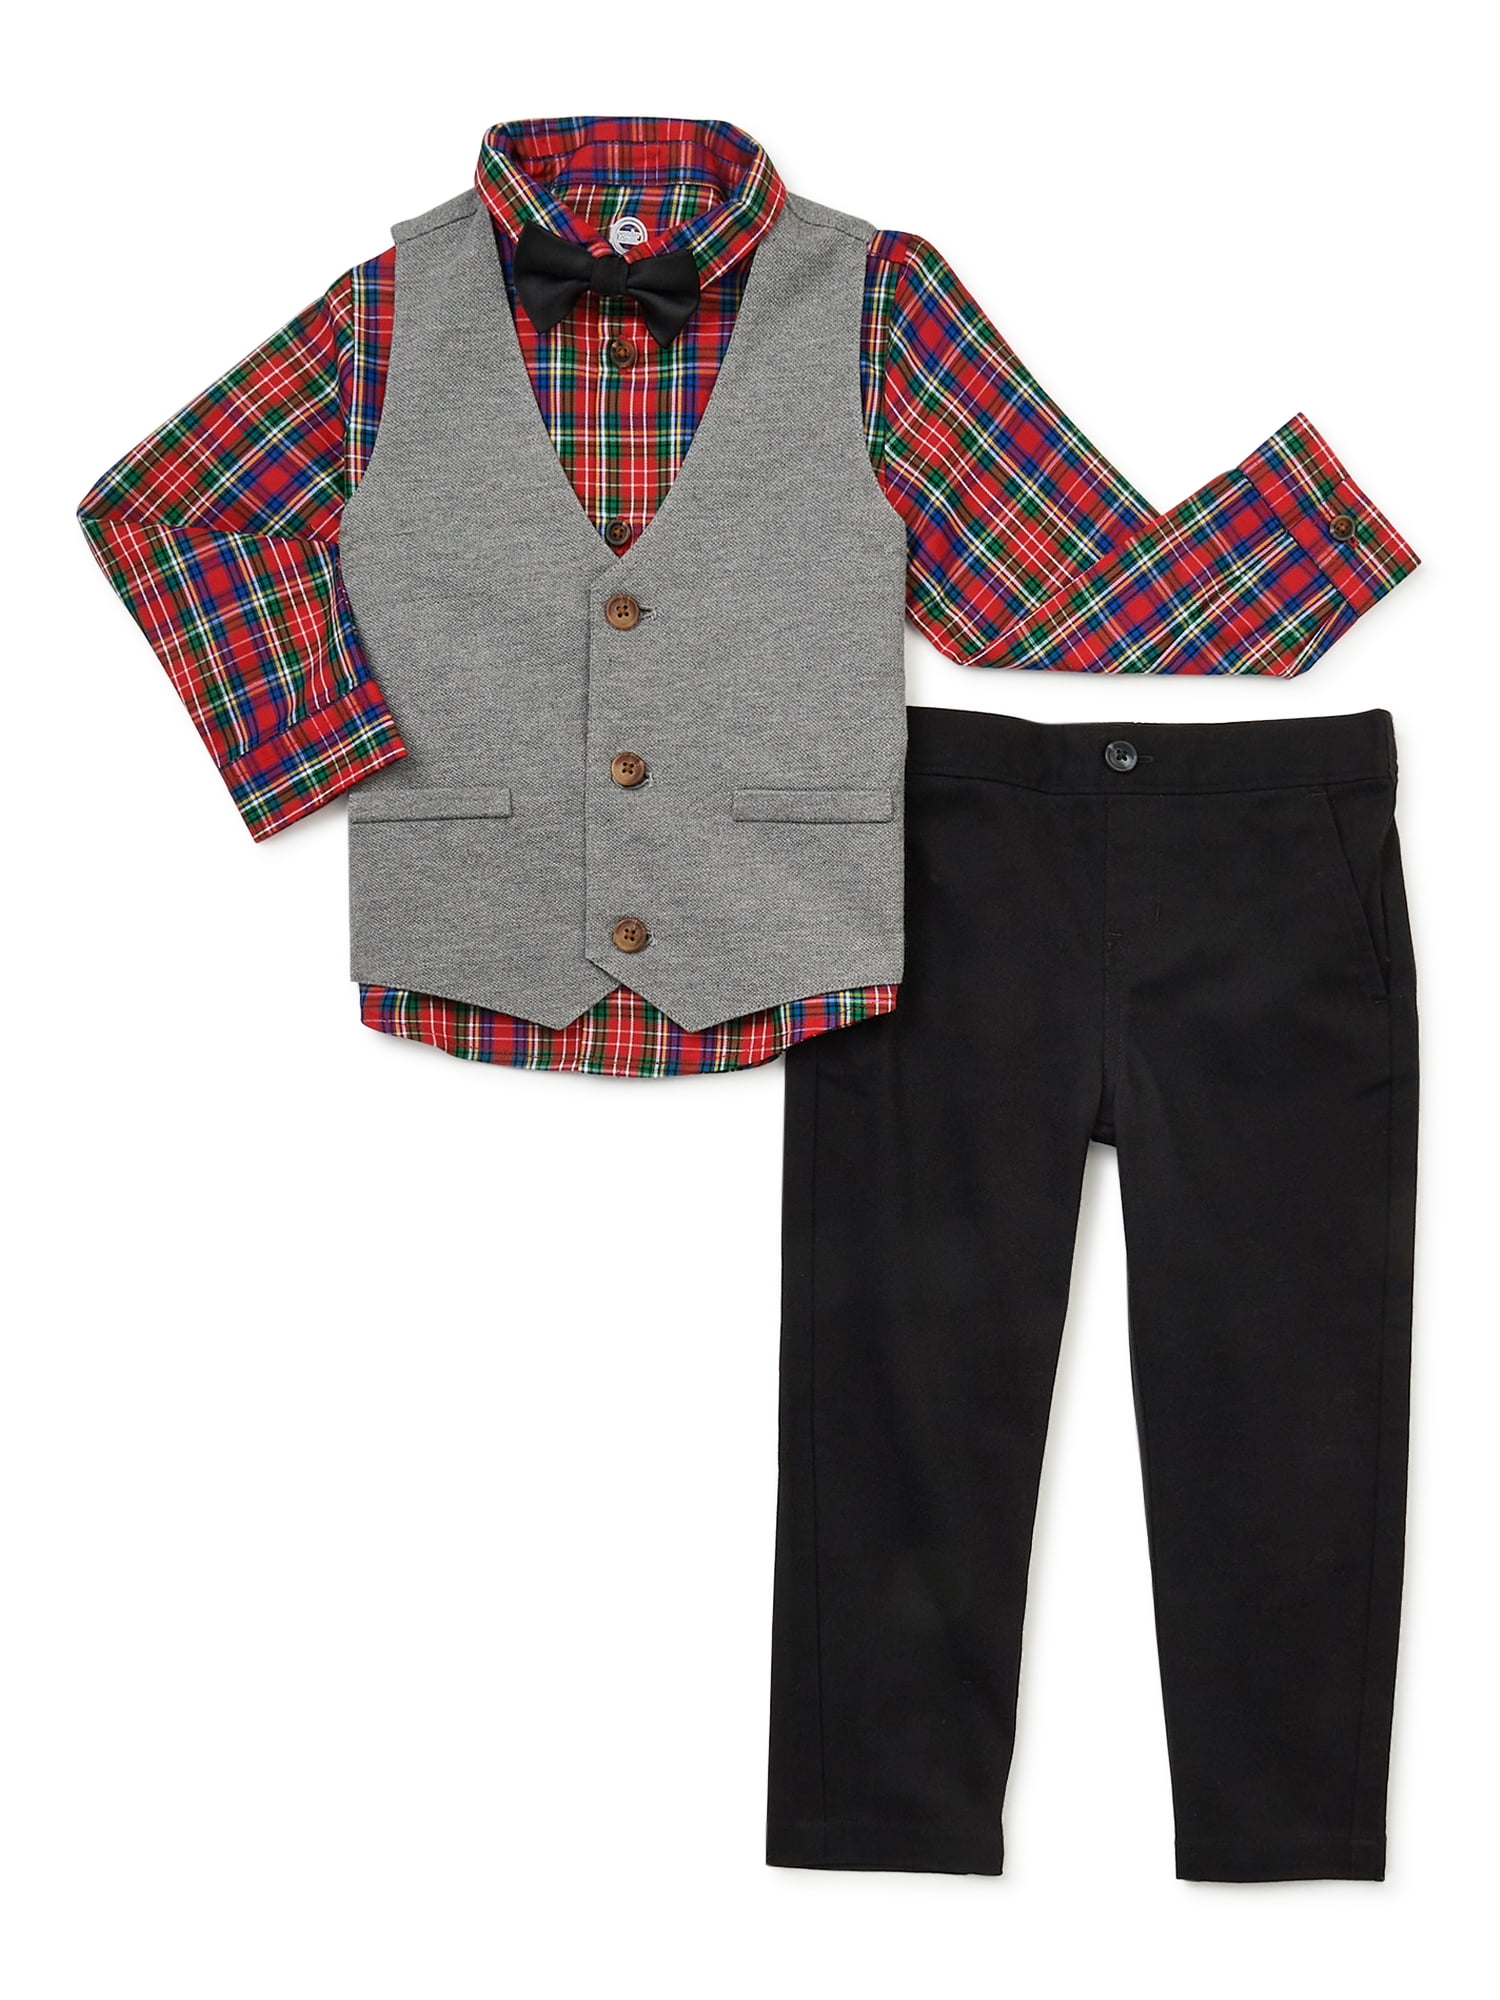 Wonder Nation Baby Boy & Toddler Boy Button-Up Shirt, Vest, Bowtie and Pants Dressy Outfit Set, 4-Piece, 0/3M-5T